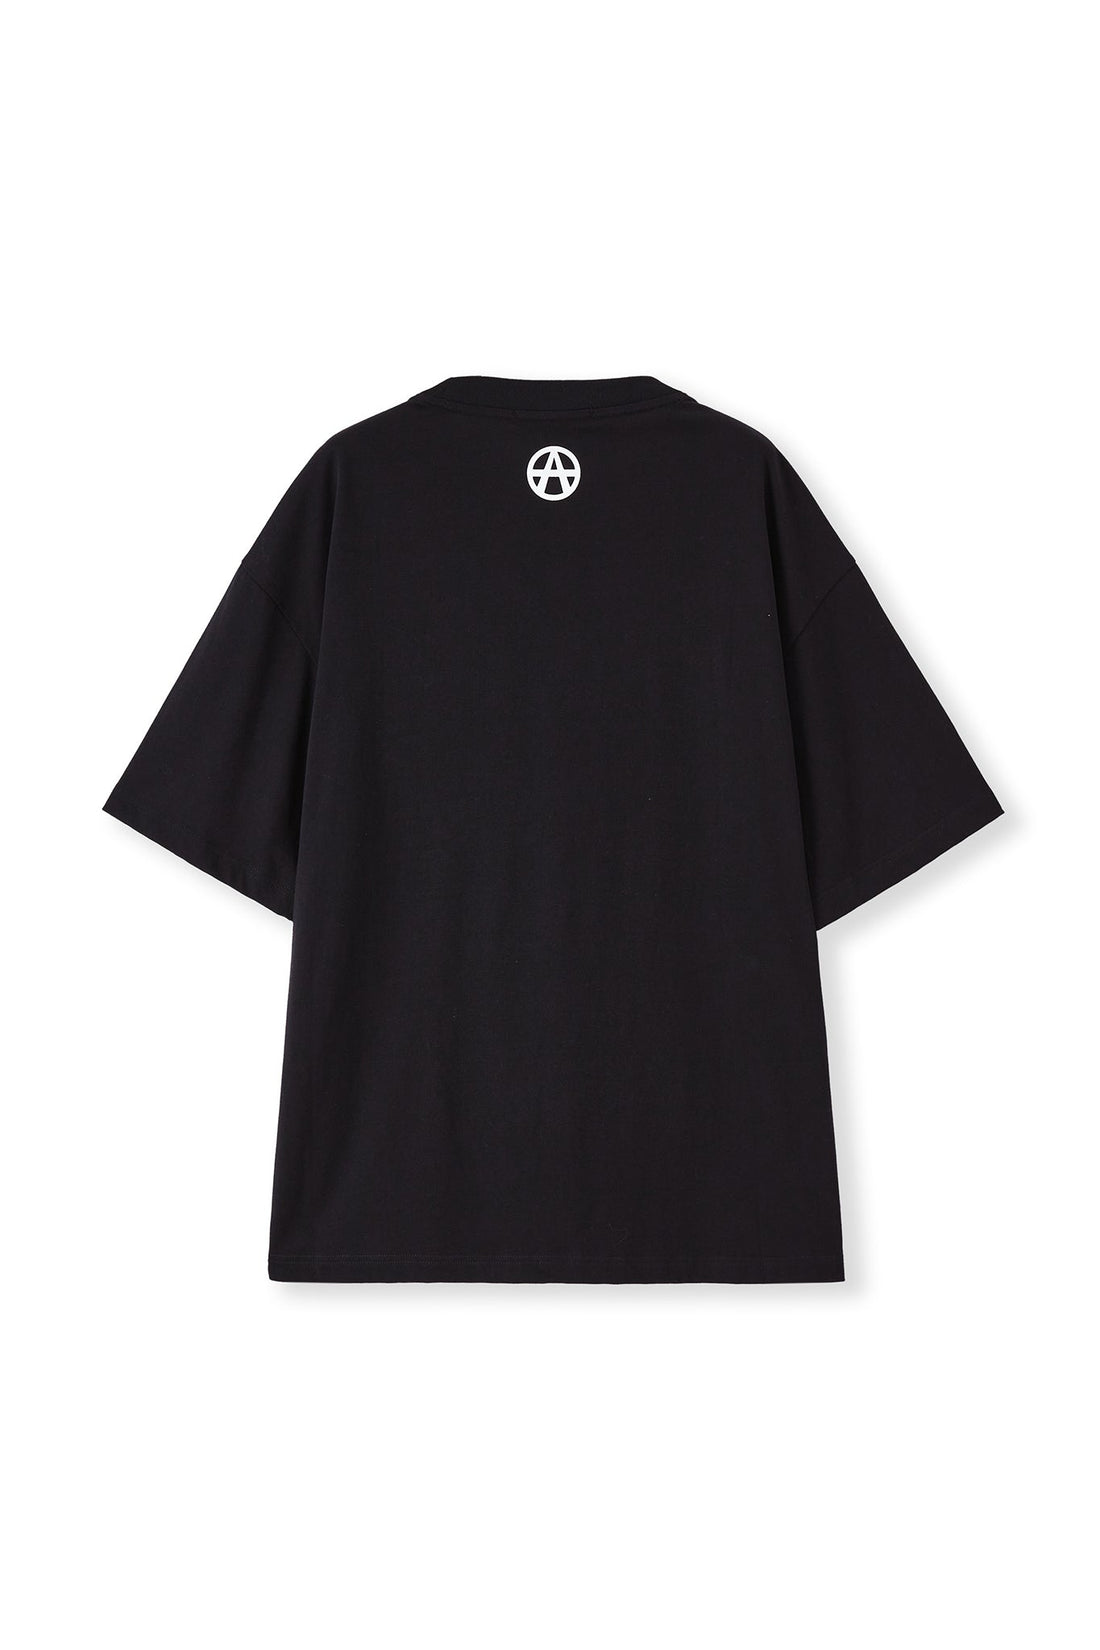 UNCOVER TSHIRT BLACK Acupuncture